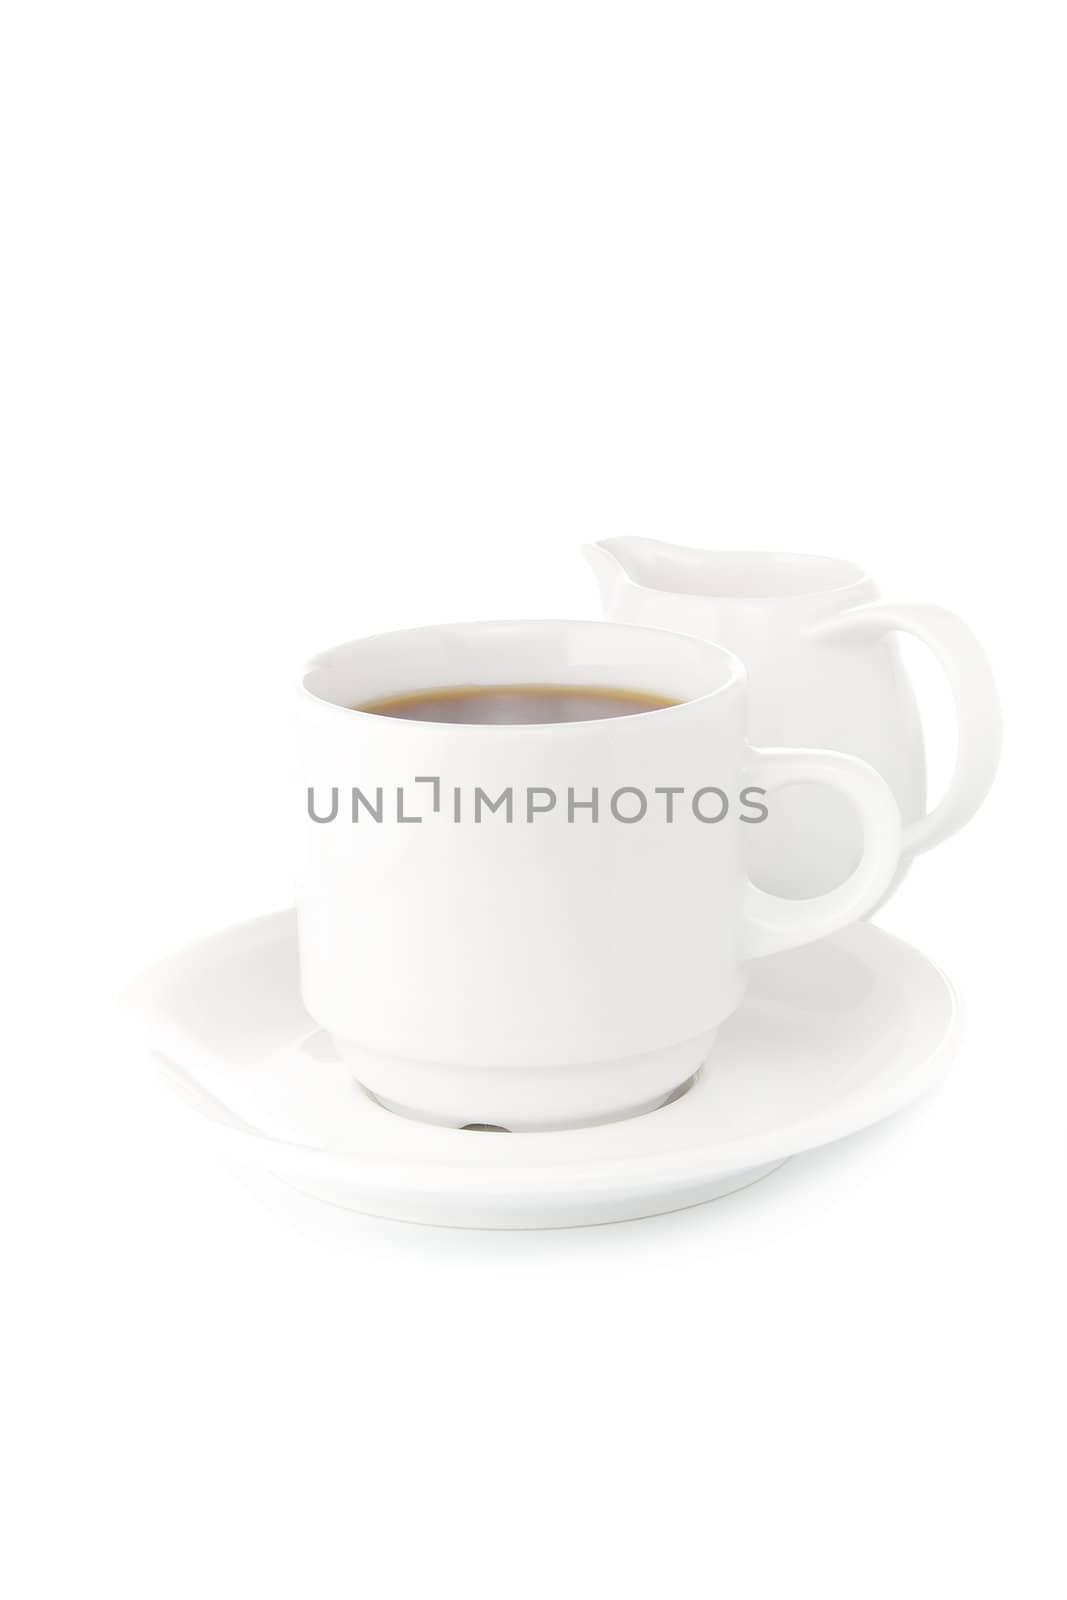 Coffe cup  isolated on white background by gitusik